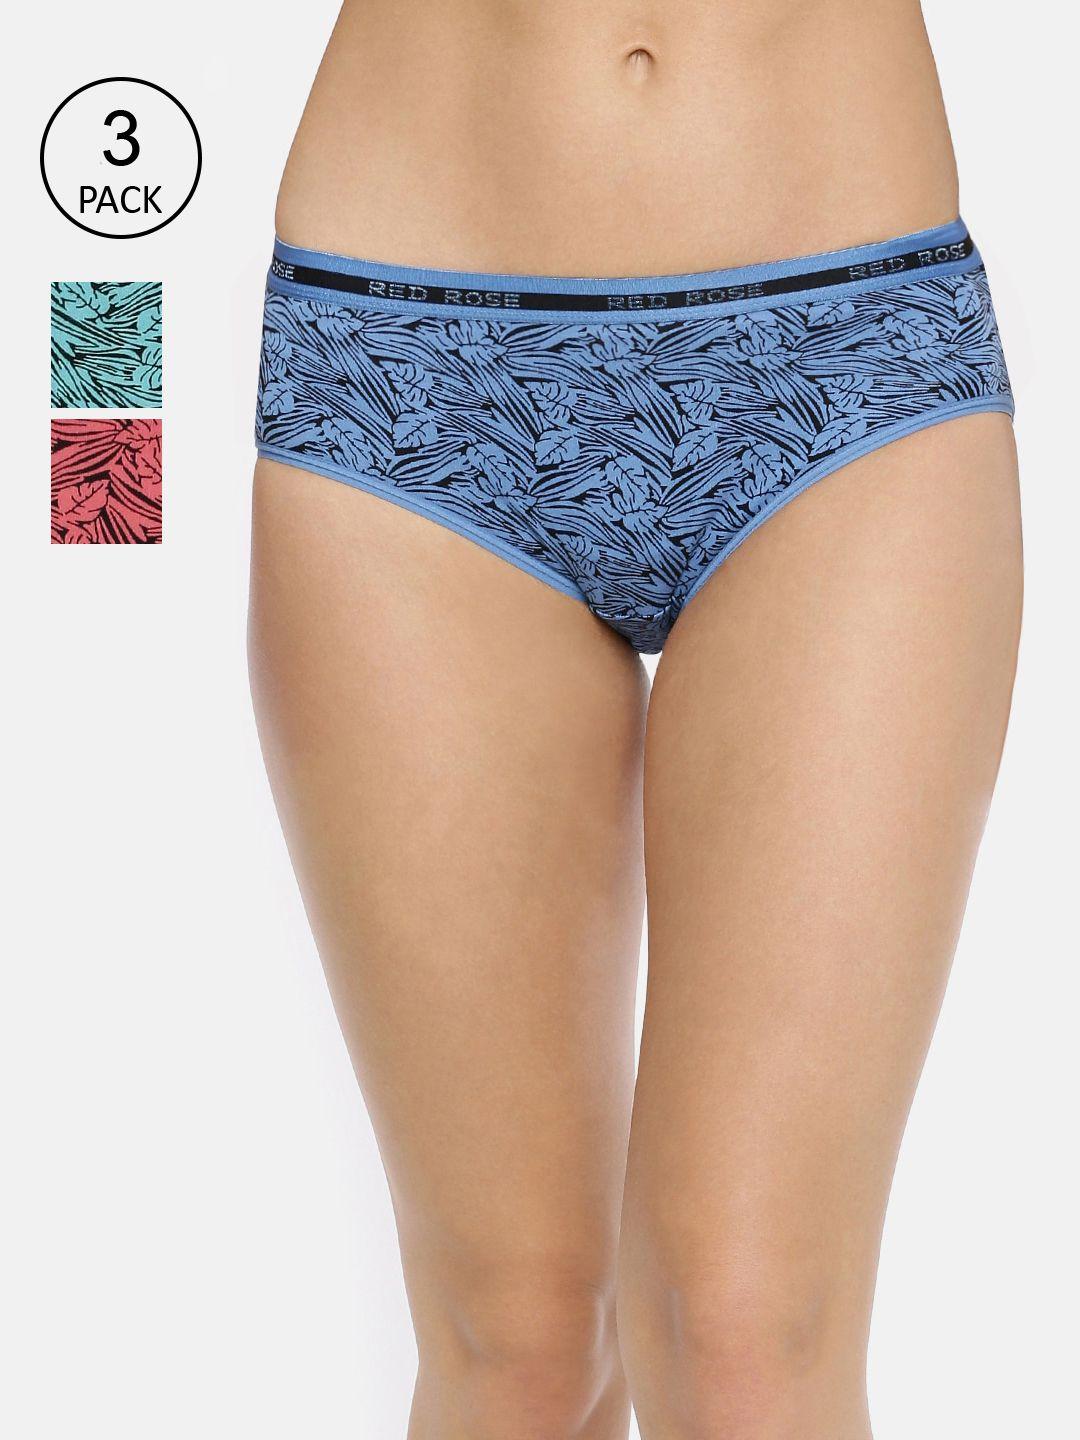 redrose women pack of 3 printed cotton hipster briefs